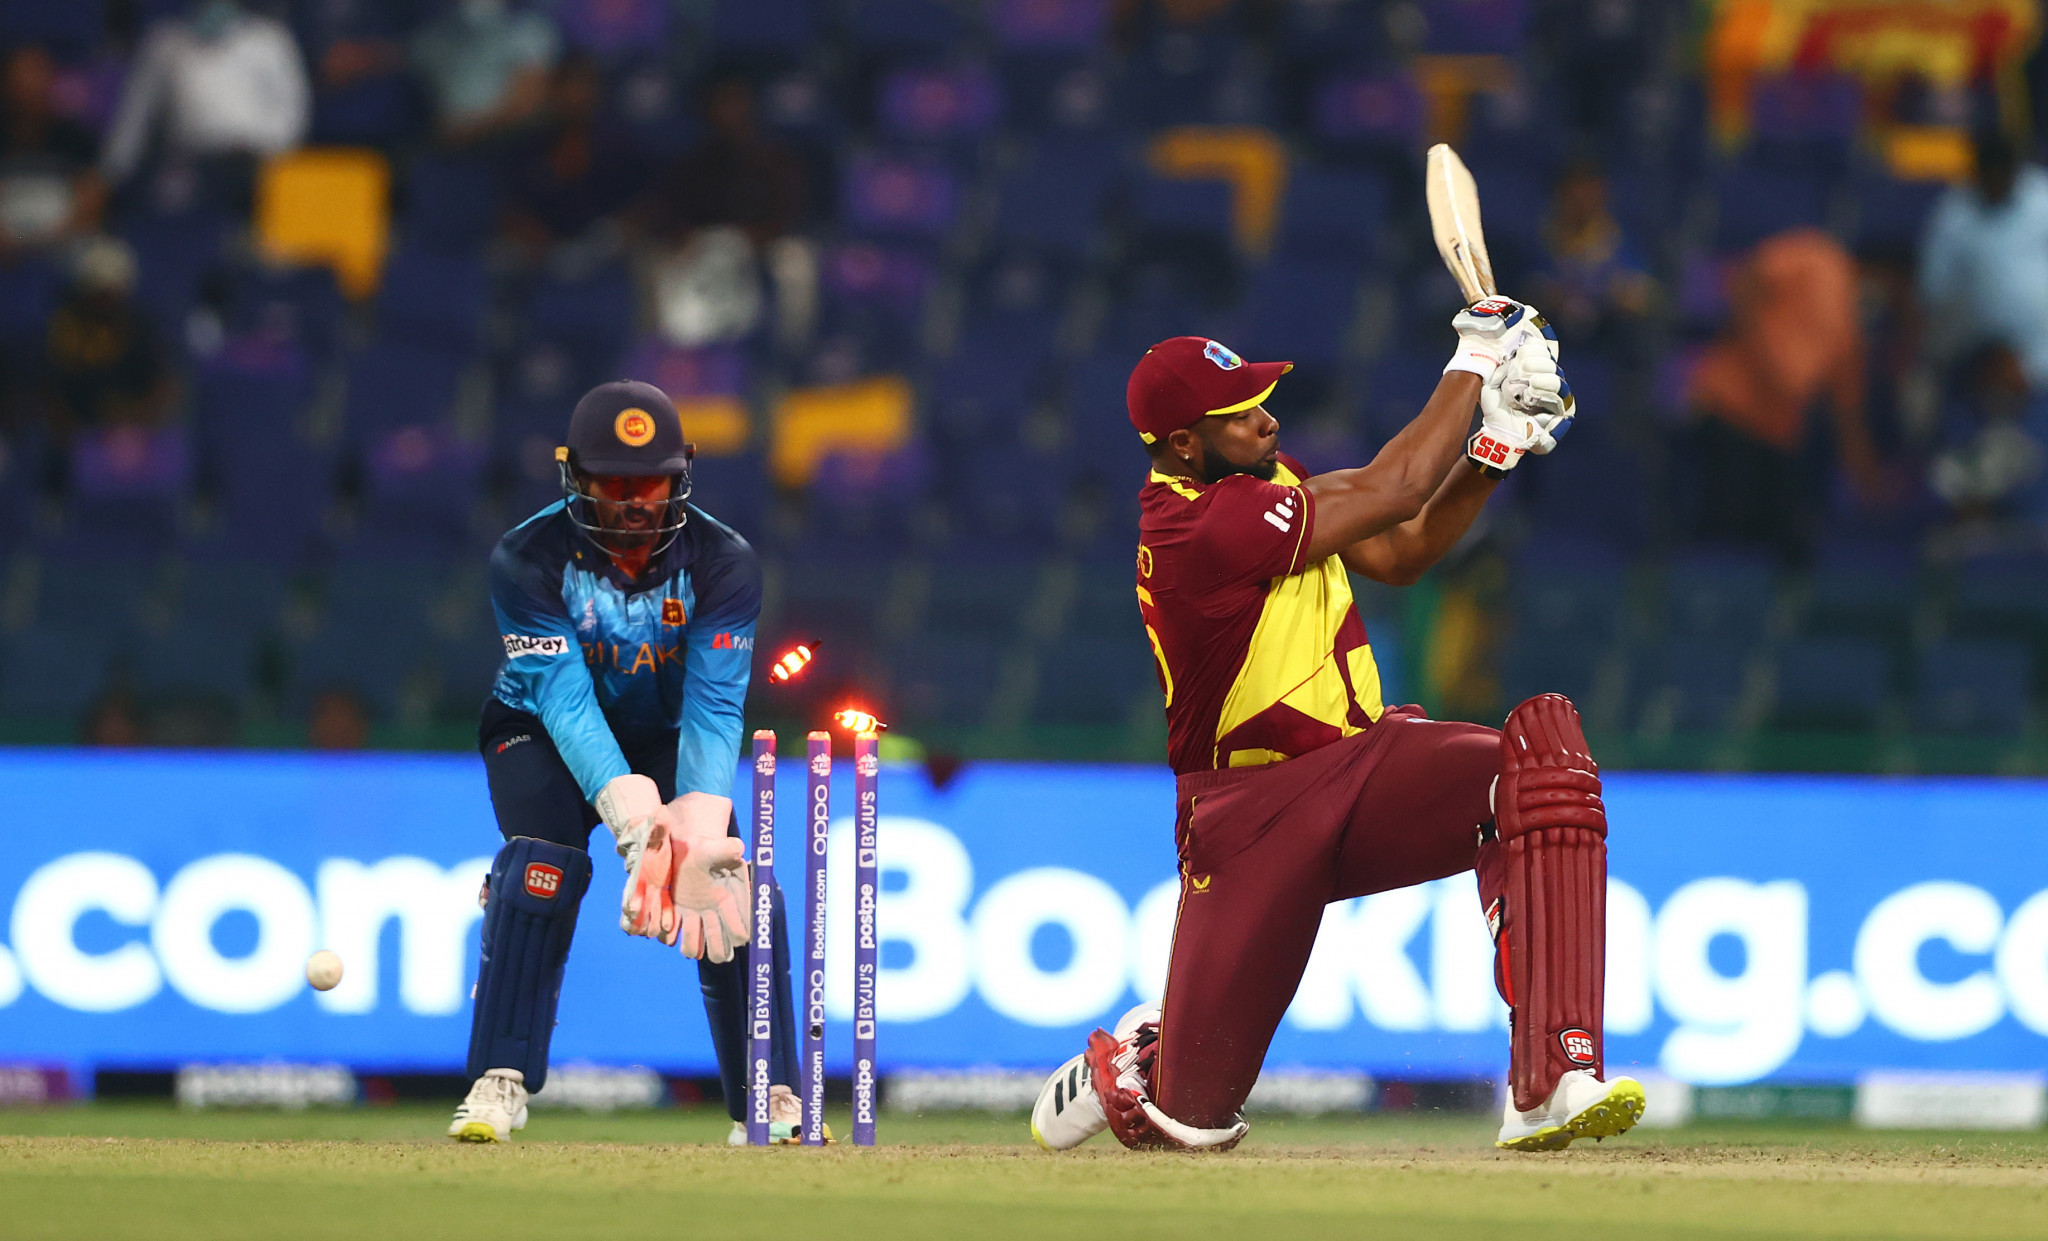 Dismal display sees defending champions West Indies eliminated from T20 World Cup